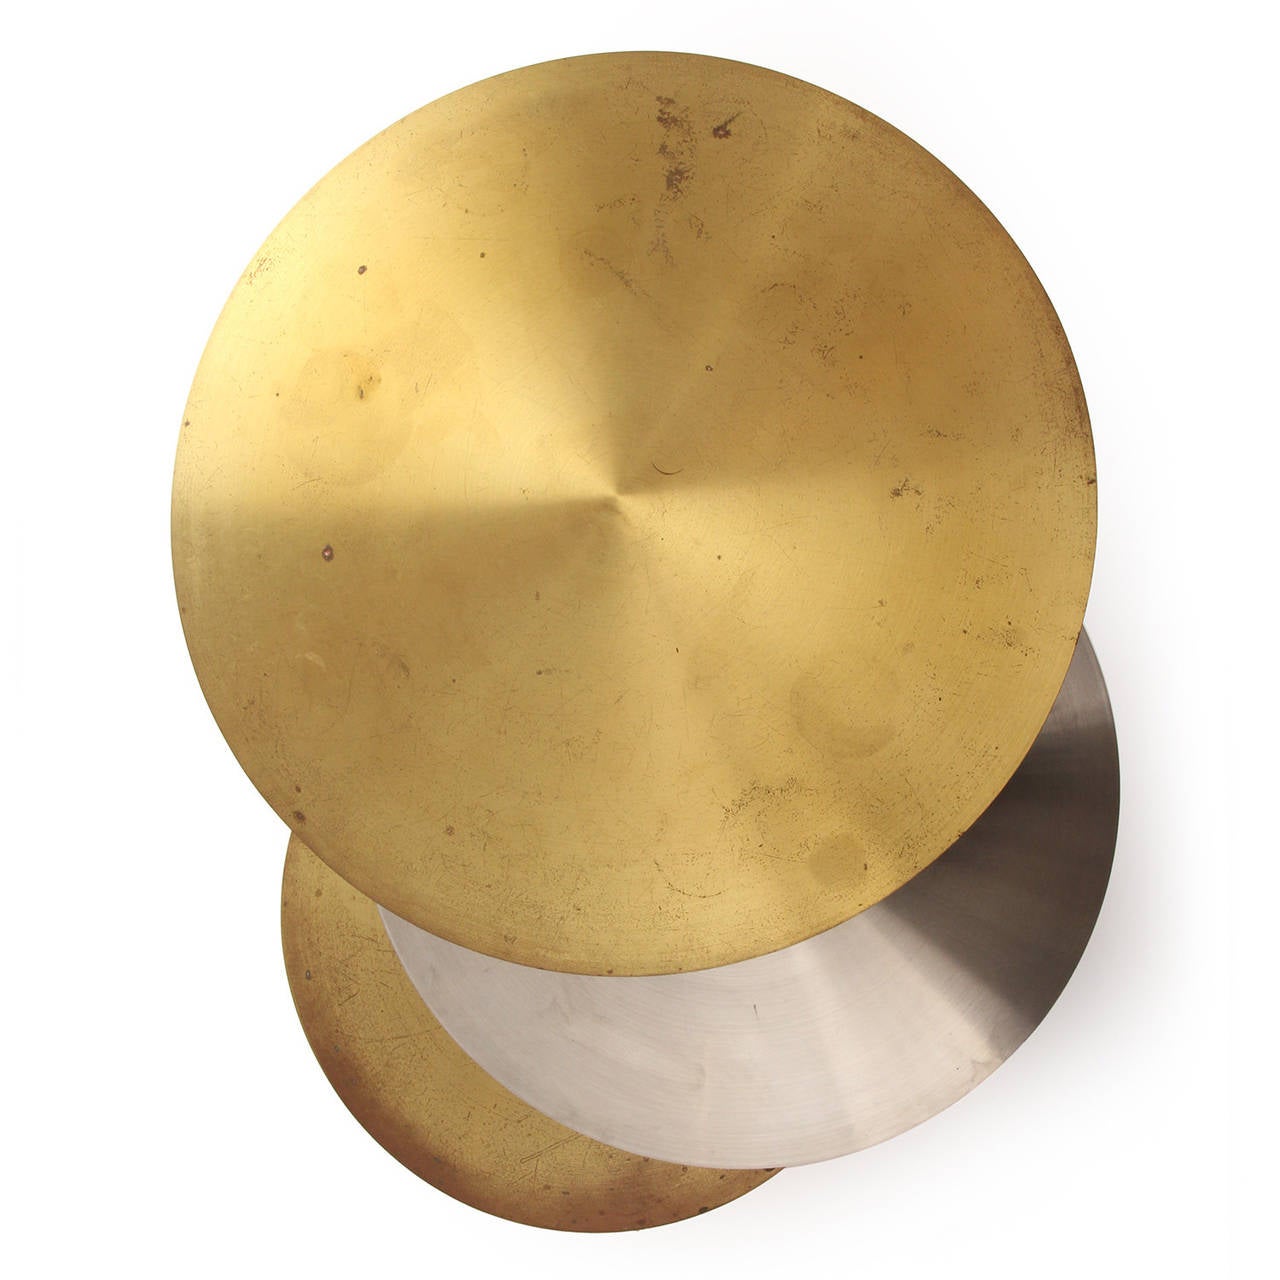 An unusual and superb quality occasional table on casters having three circular planes (two in brass, the center in brushed steel) conjoined by a central steel stem. The top two cantilevered surfaces rotate freely around the steel stem.